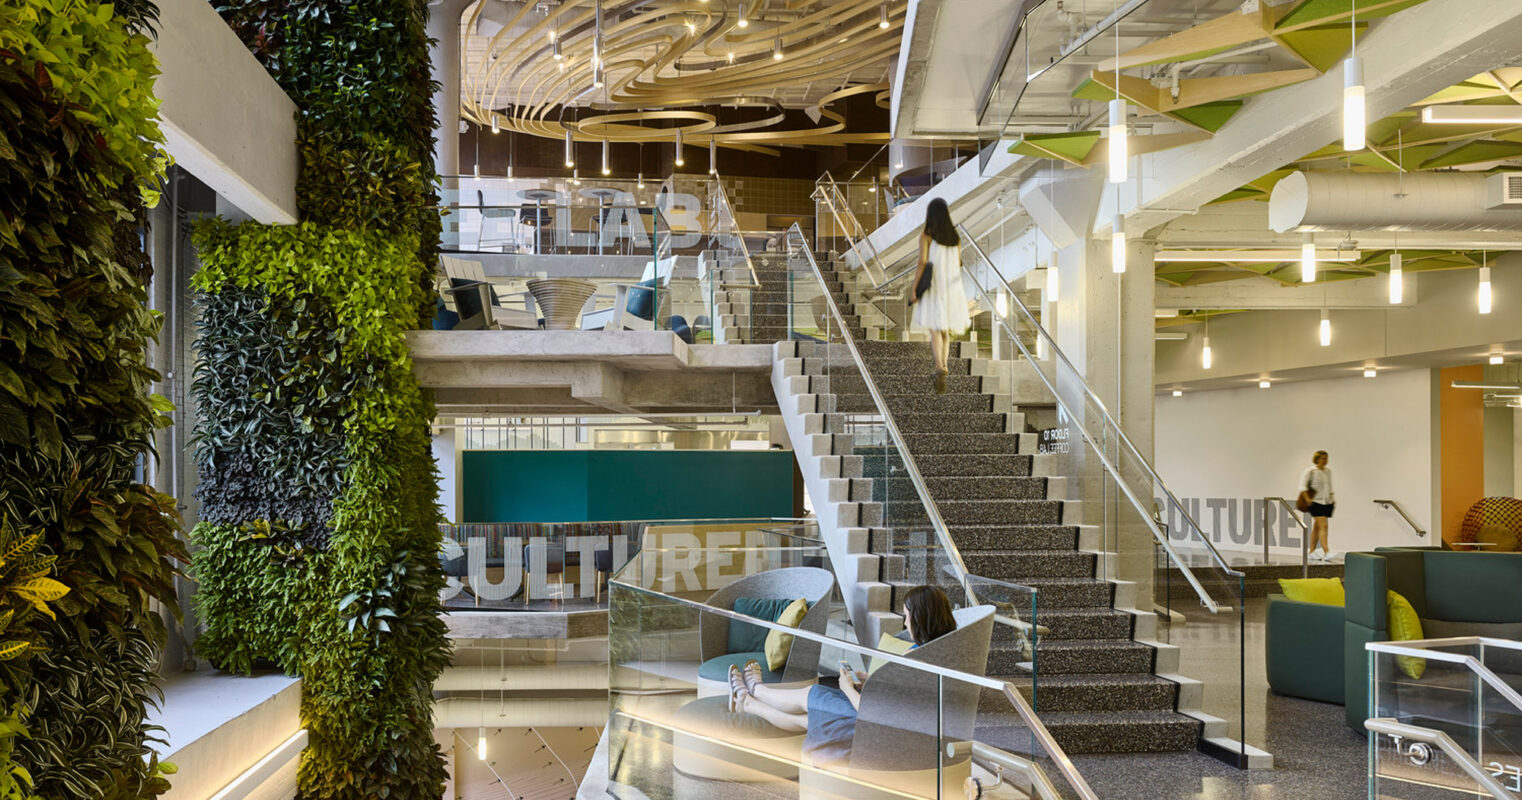 Modern office interior featuring a grand staircase with glass balustrades next to a verdant living wall. The space is illuminated by sculptural ceiling lights reflecting on reflective surfaces, emphasizing the blend of natural elements with contemporary design.